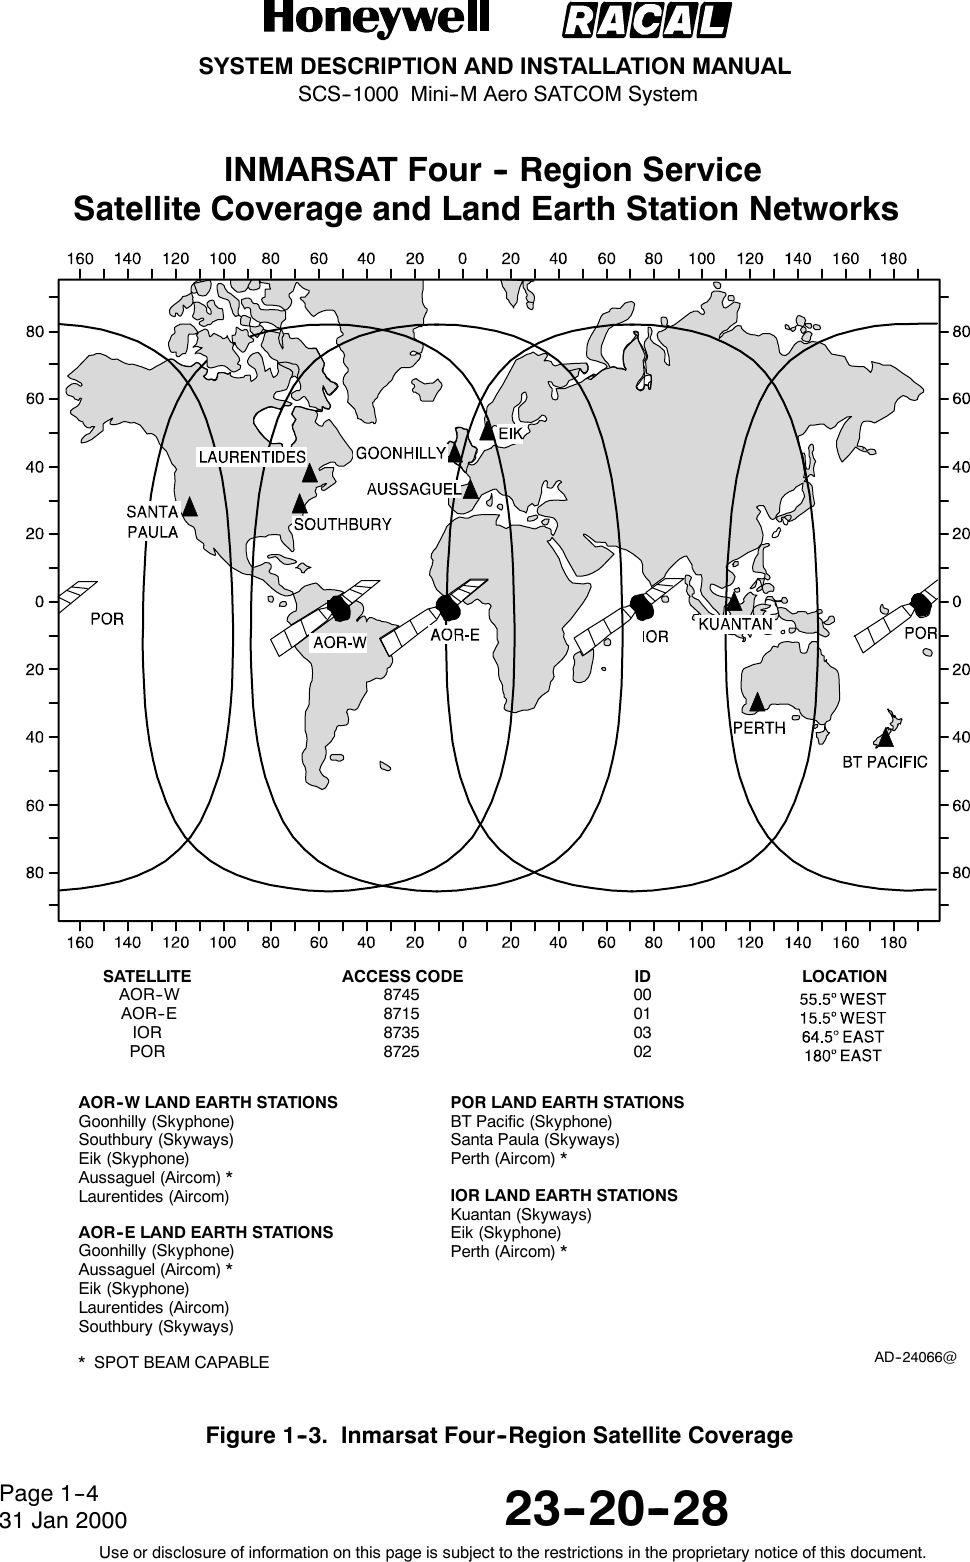 SYSTEM DESCRIPTION AND INSTALLATION MANUALSCS--1000 Mini--M Aero SATCOM System23--20--28Use or disclosure of information on this page is subject to the restrictions in the proprietary notice of this document.Page 1--431 Jan 2000INMARSAT Four -- Region ServiceSatellite Coverage and Land Earth Station NetworksAD--24066@AOR--W LAND EARTH STATIONSGoonhilly (Skyphone)Southbury (Skyways)Eik (Skyphone)Aussaguel (Aircom) *Laurentides (Aircom)AOR--E LAND EARTH STATIONSGoonhilly (Skyphone)Aussaguel (Aircom) *Eik (Skyphone)Laurentides (Aircom)Southbury (Skyways)POR LAND EARTH STATIONSBT Pacific (Skyphone)Santa Paula (Skyways)Perth (Aircom) *IOR LAND EARTH STATIONSKuantan (Skyways)Eik (Skyphone)Perth (Aircom) *SATELLITEAOR--WAOR--EIORPORACCESS CODE8745871587358725ID00010302LOCATION* SPOT BEAM CAPABLEFigure 1--3. Inmarsat Four--Region Satellite Coverage